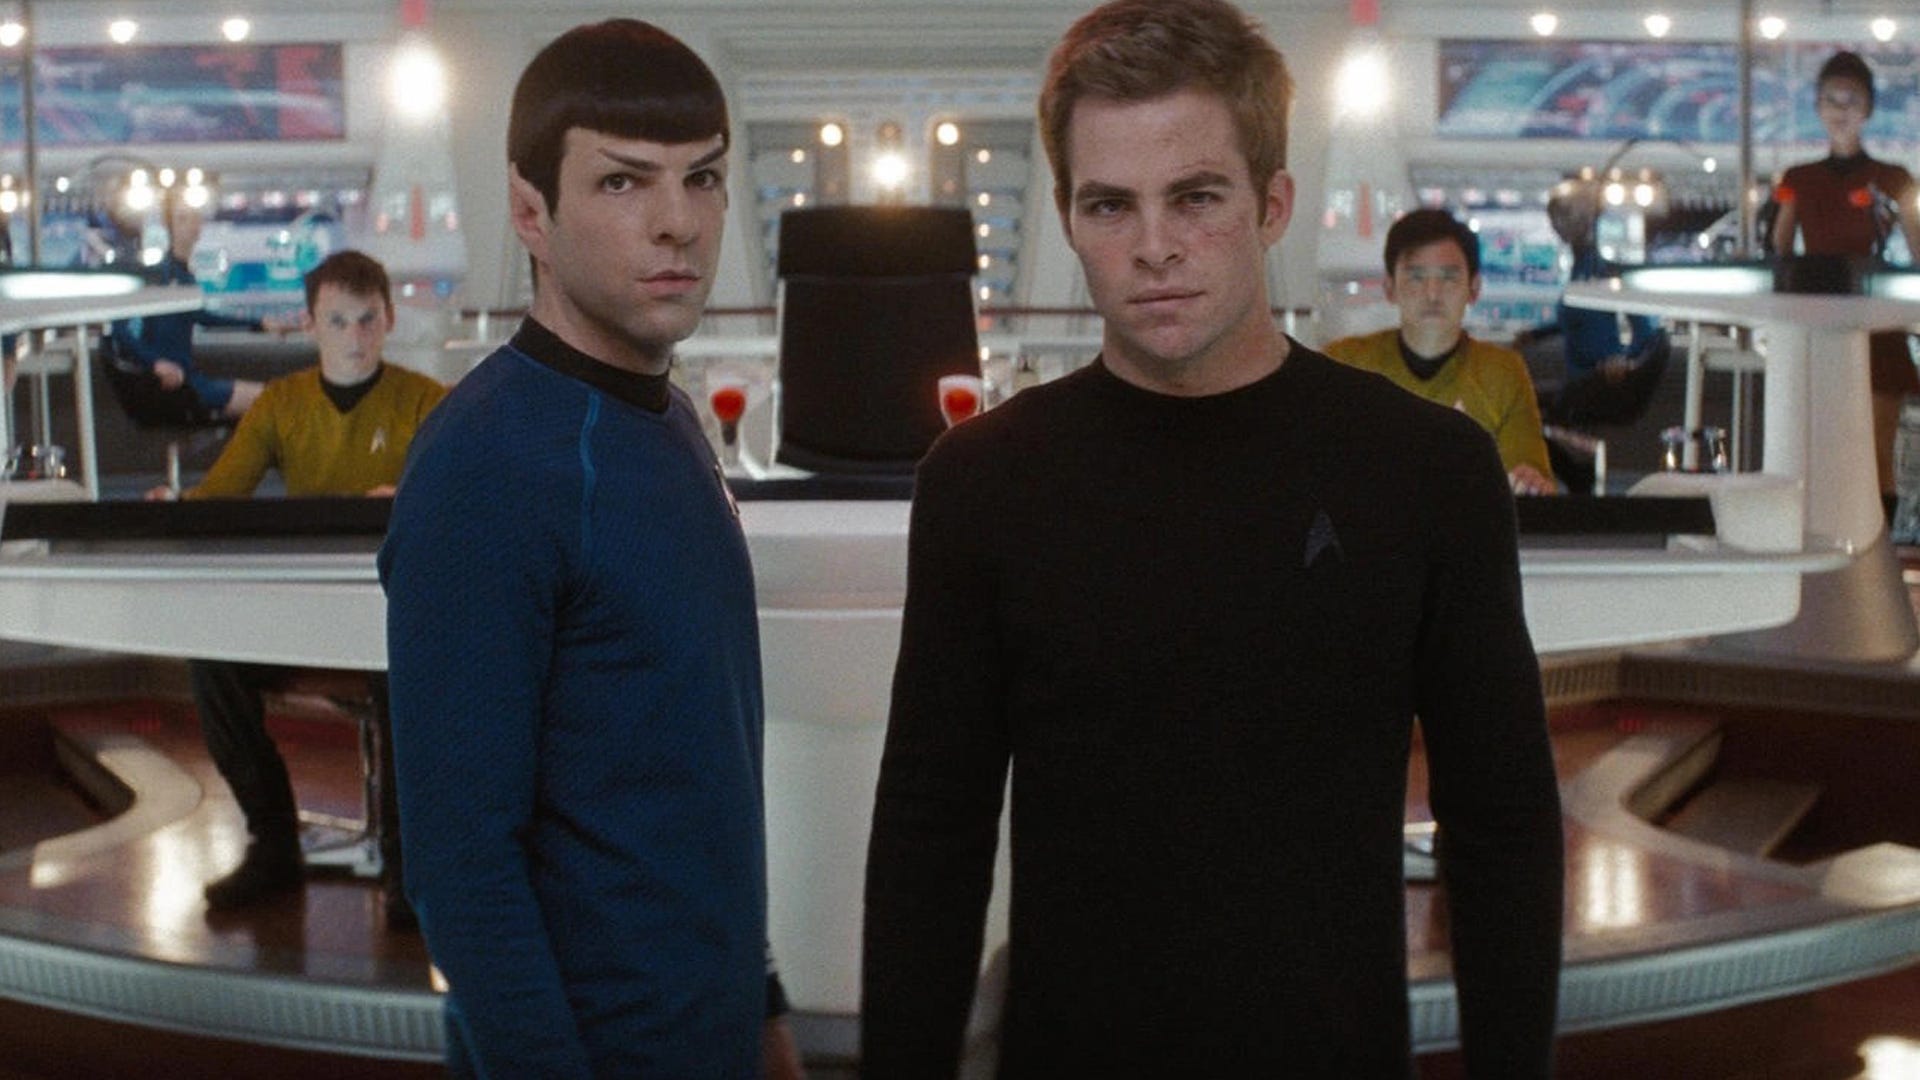 Star Trek 4 is still happening, surprisingly, and it's sounding like the end of the reboot films